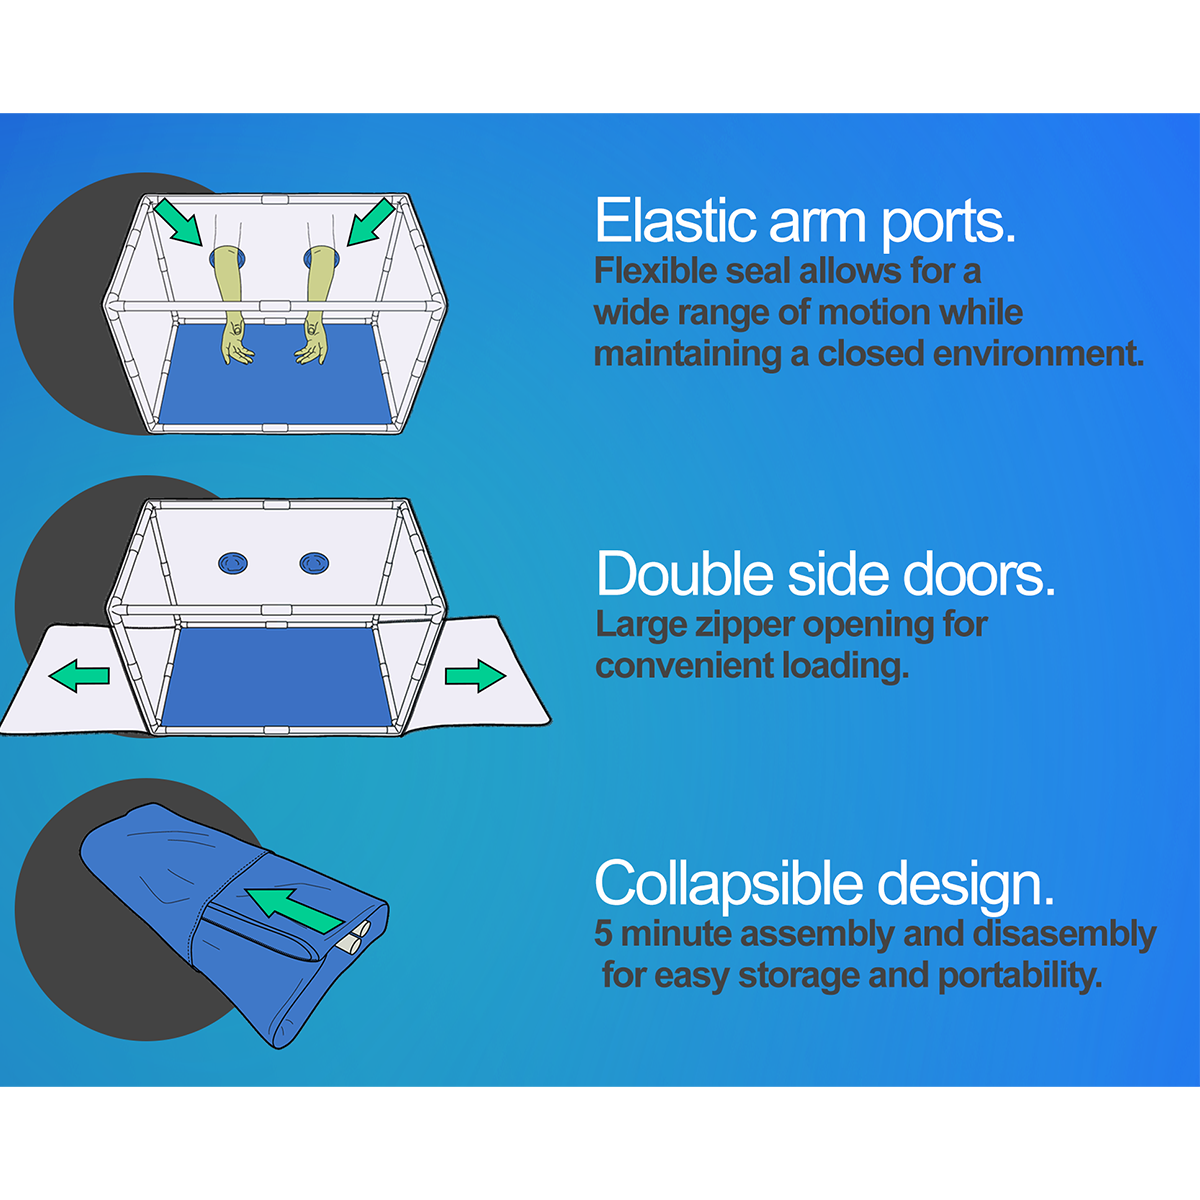 Inforgraphic for the Bella Bora Still Air Box, demonstrating 3 points: elastic arm ports, double side doors with large zipper openings, and collapsible design for easy storage.